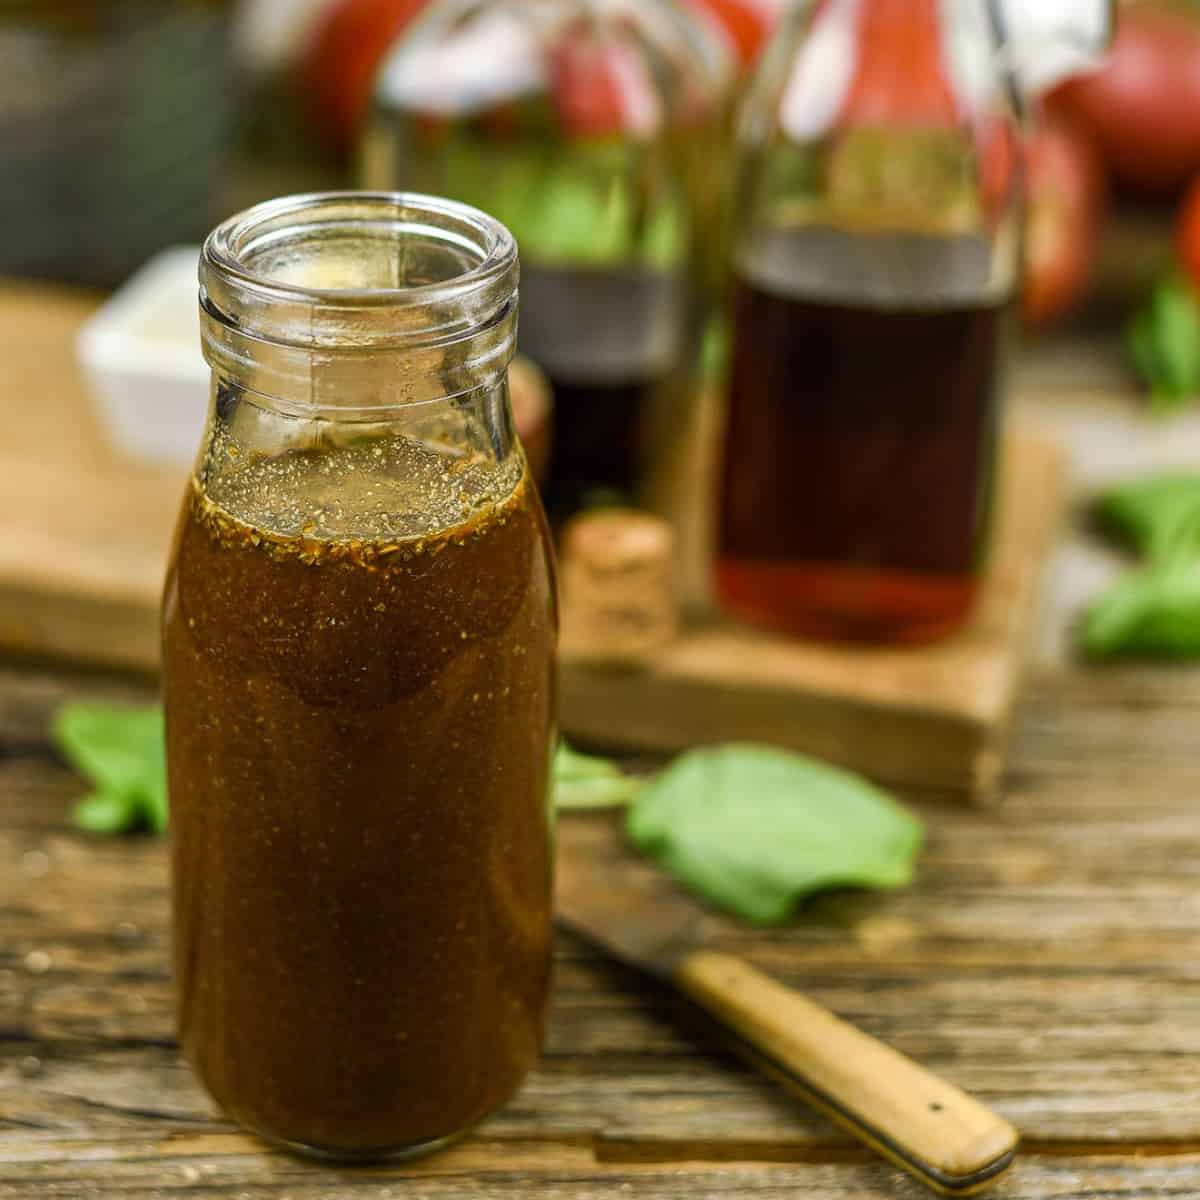 https://shaneandsimple.com/wp-content/uploads/2020/07/oil-free-salad-dressing-recipe-FEATURED.jpg